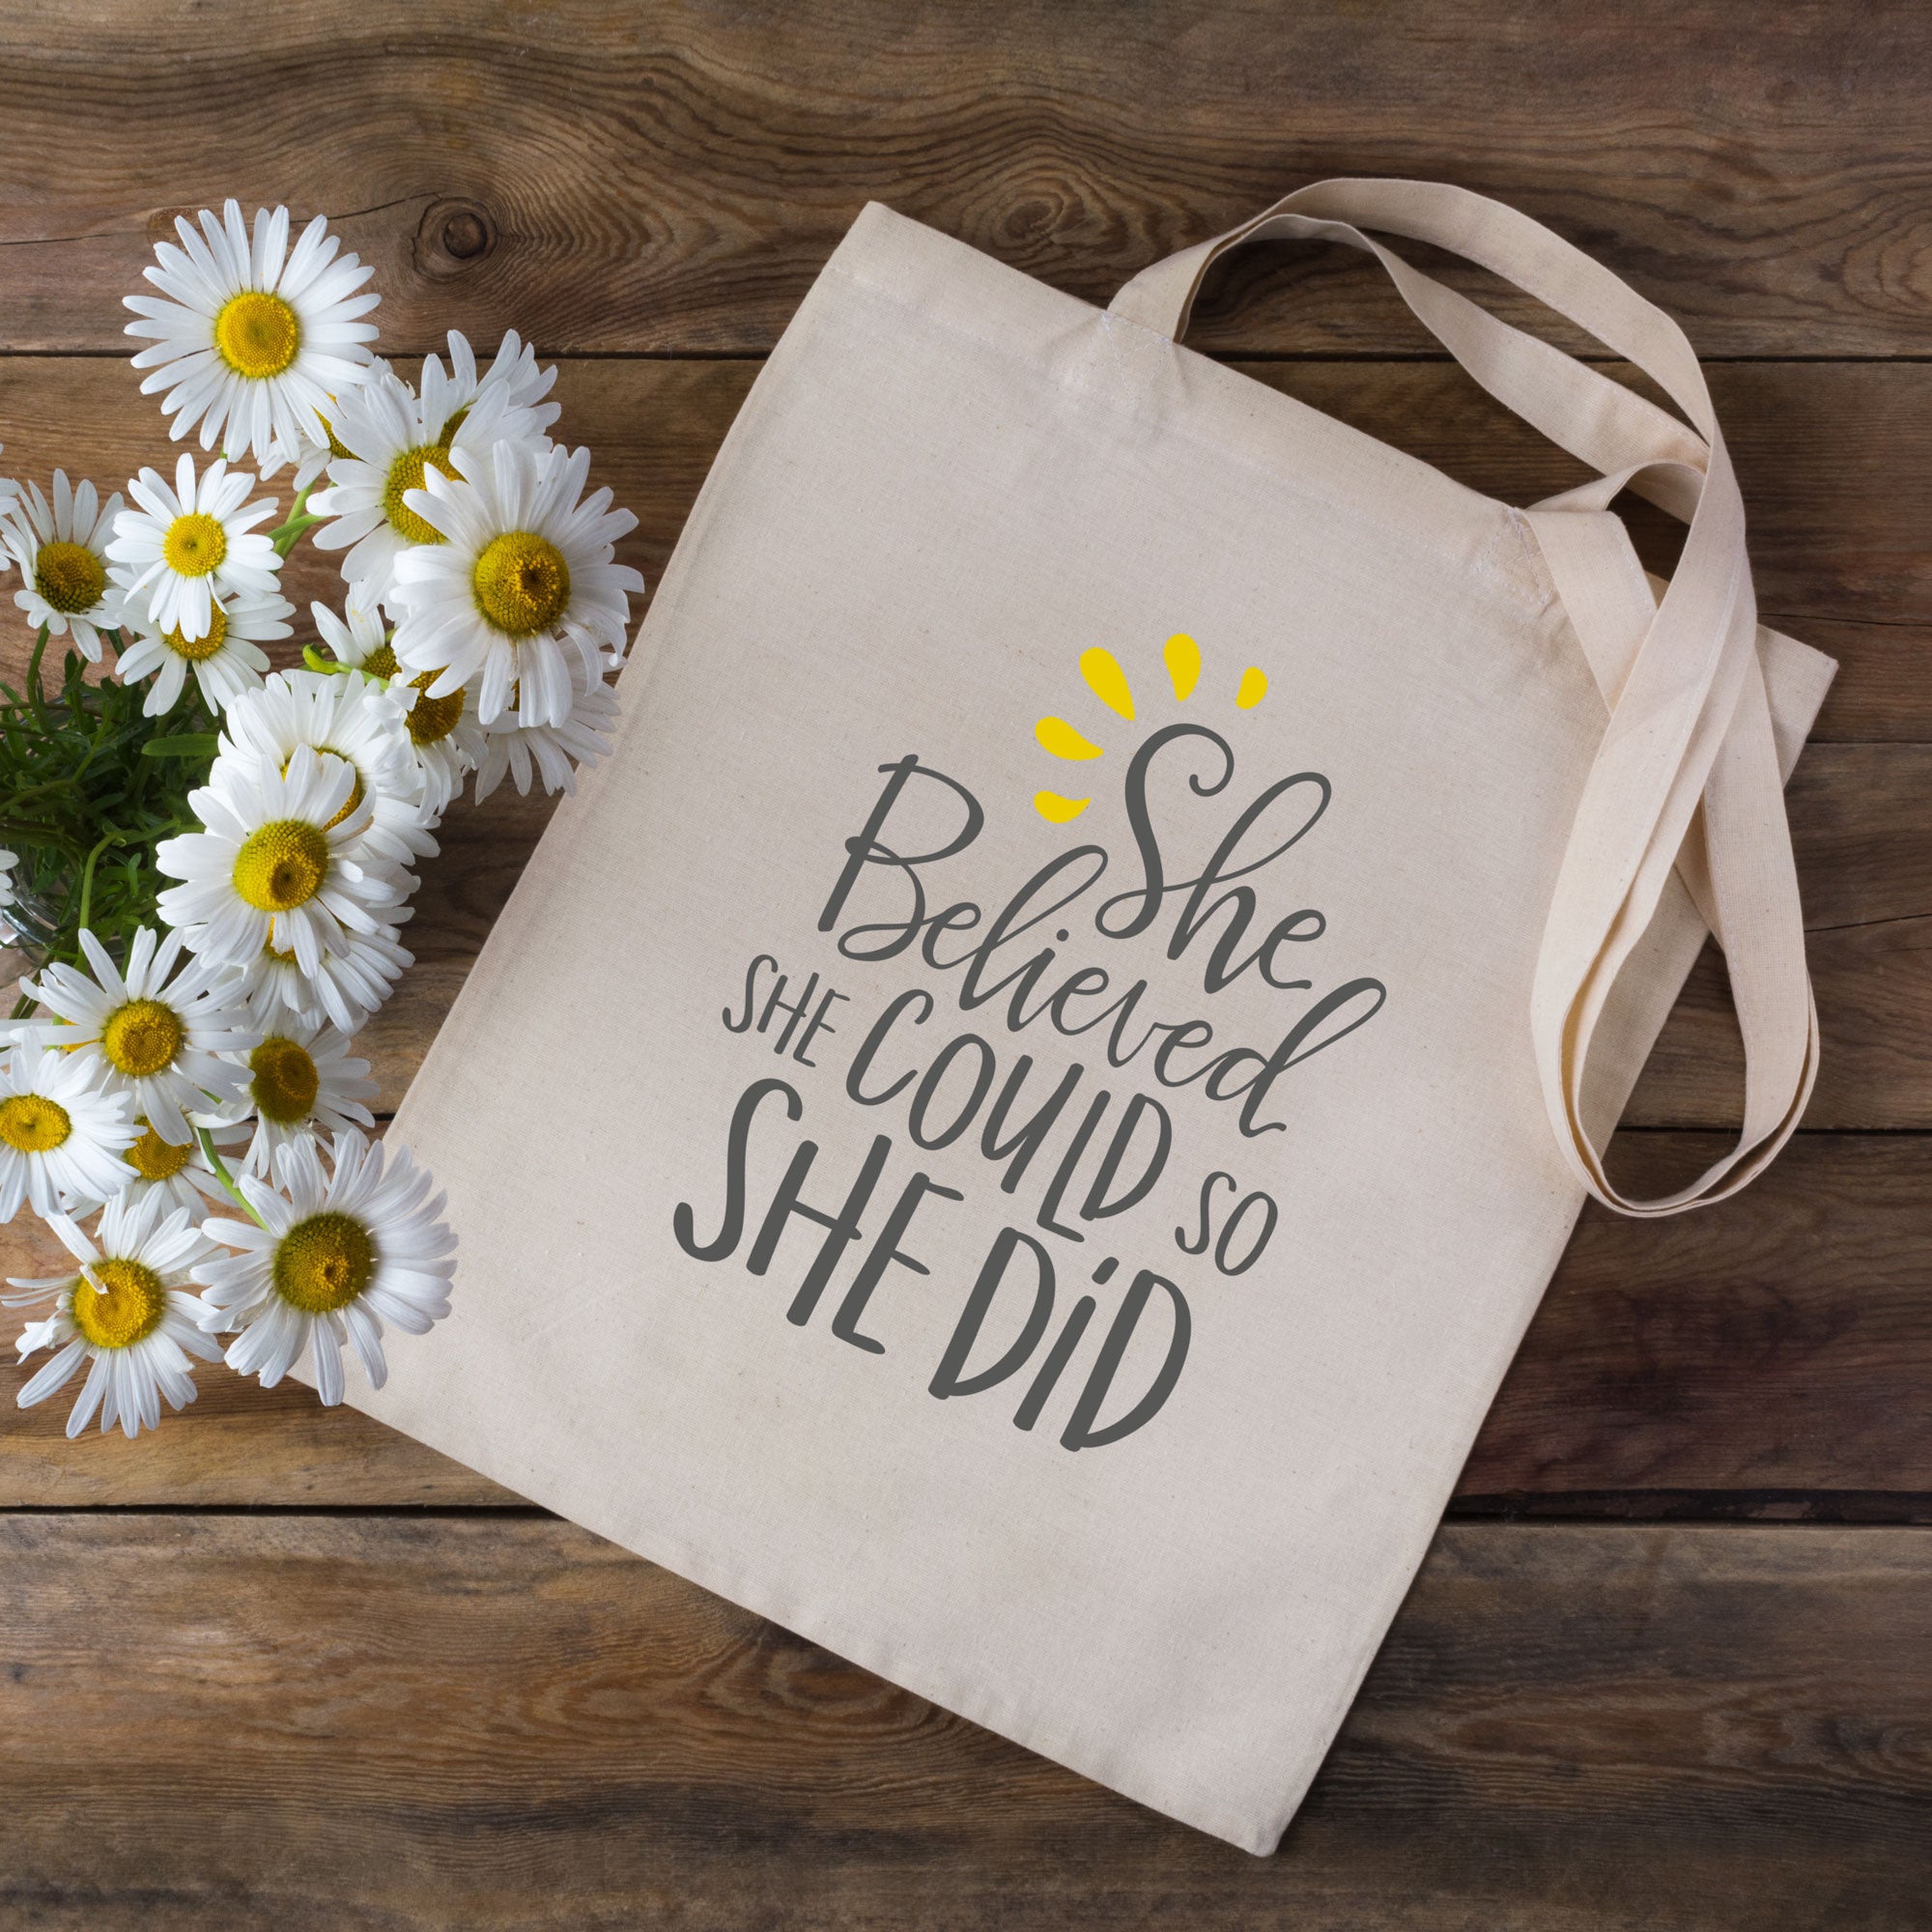 She Believed She Could So She Did Tote Bag